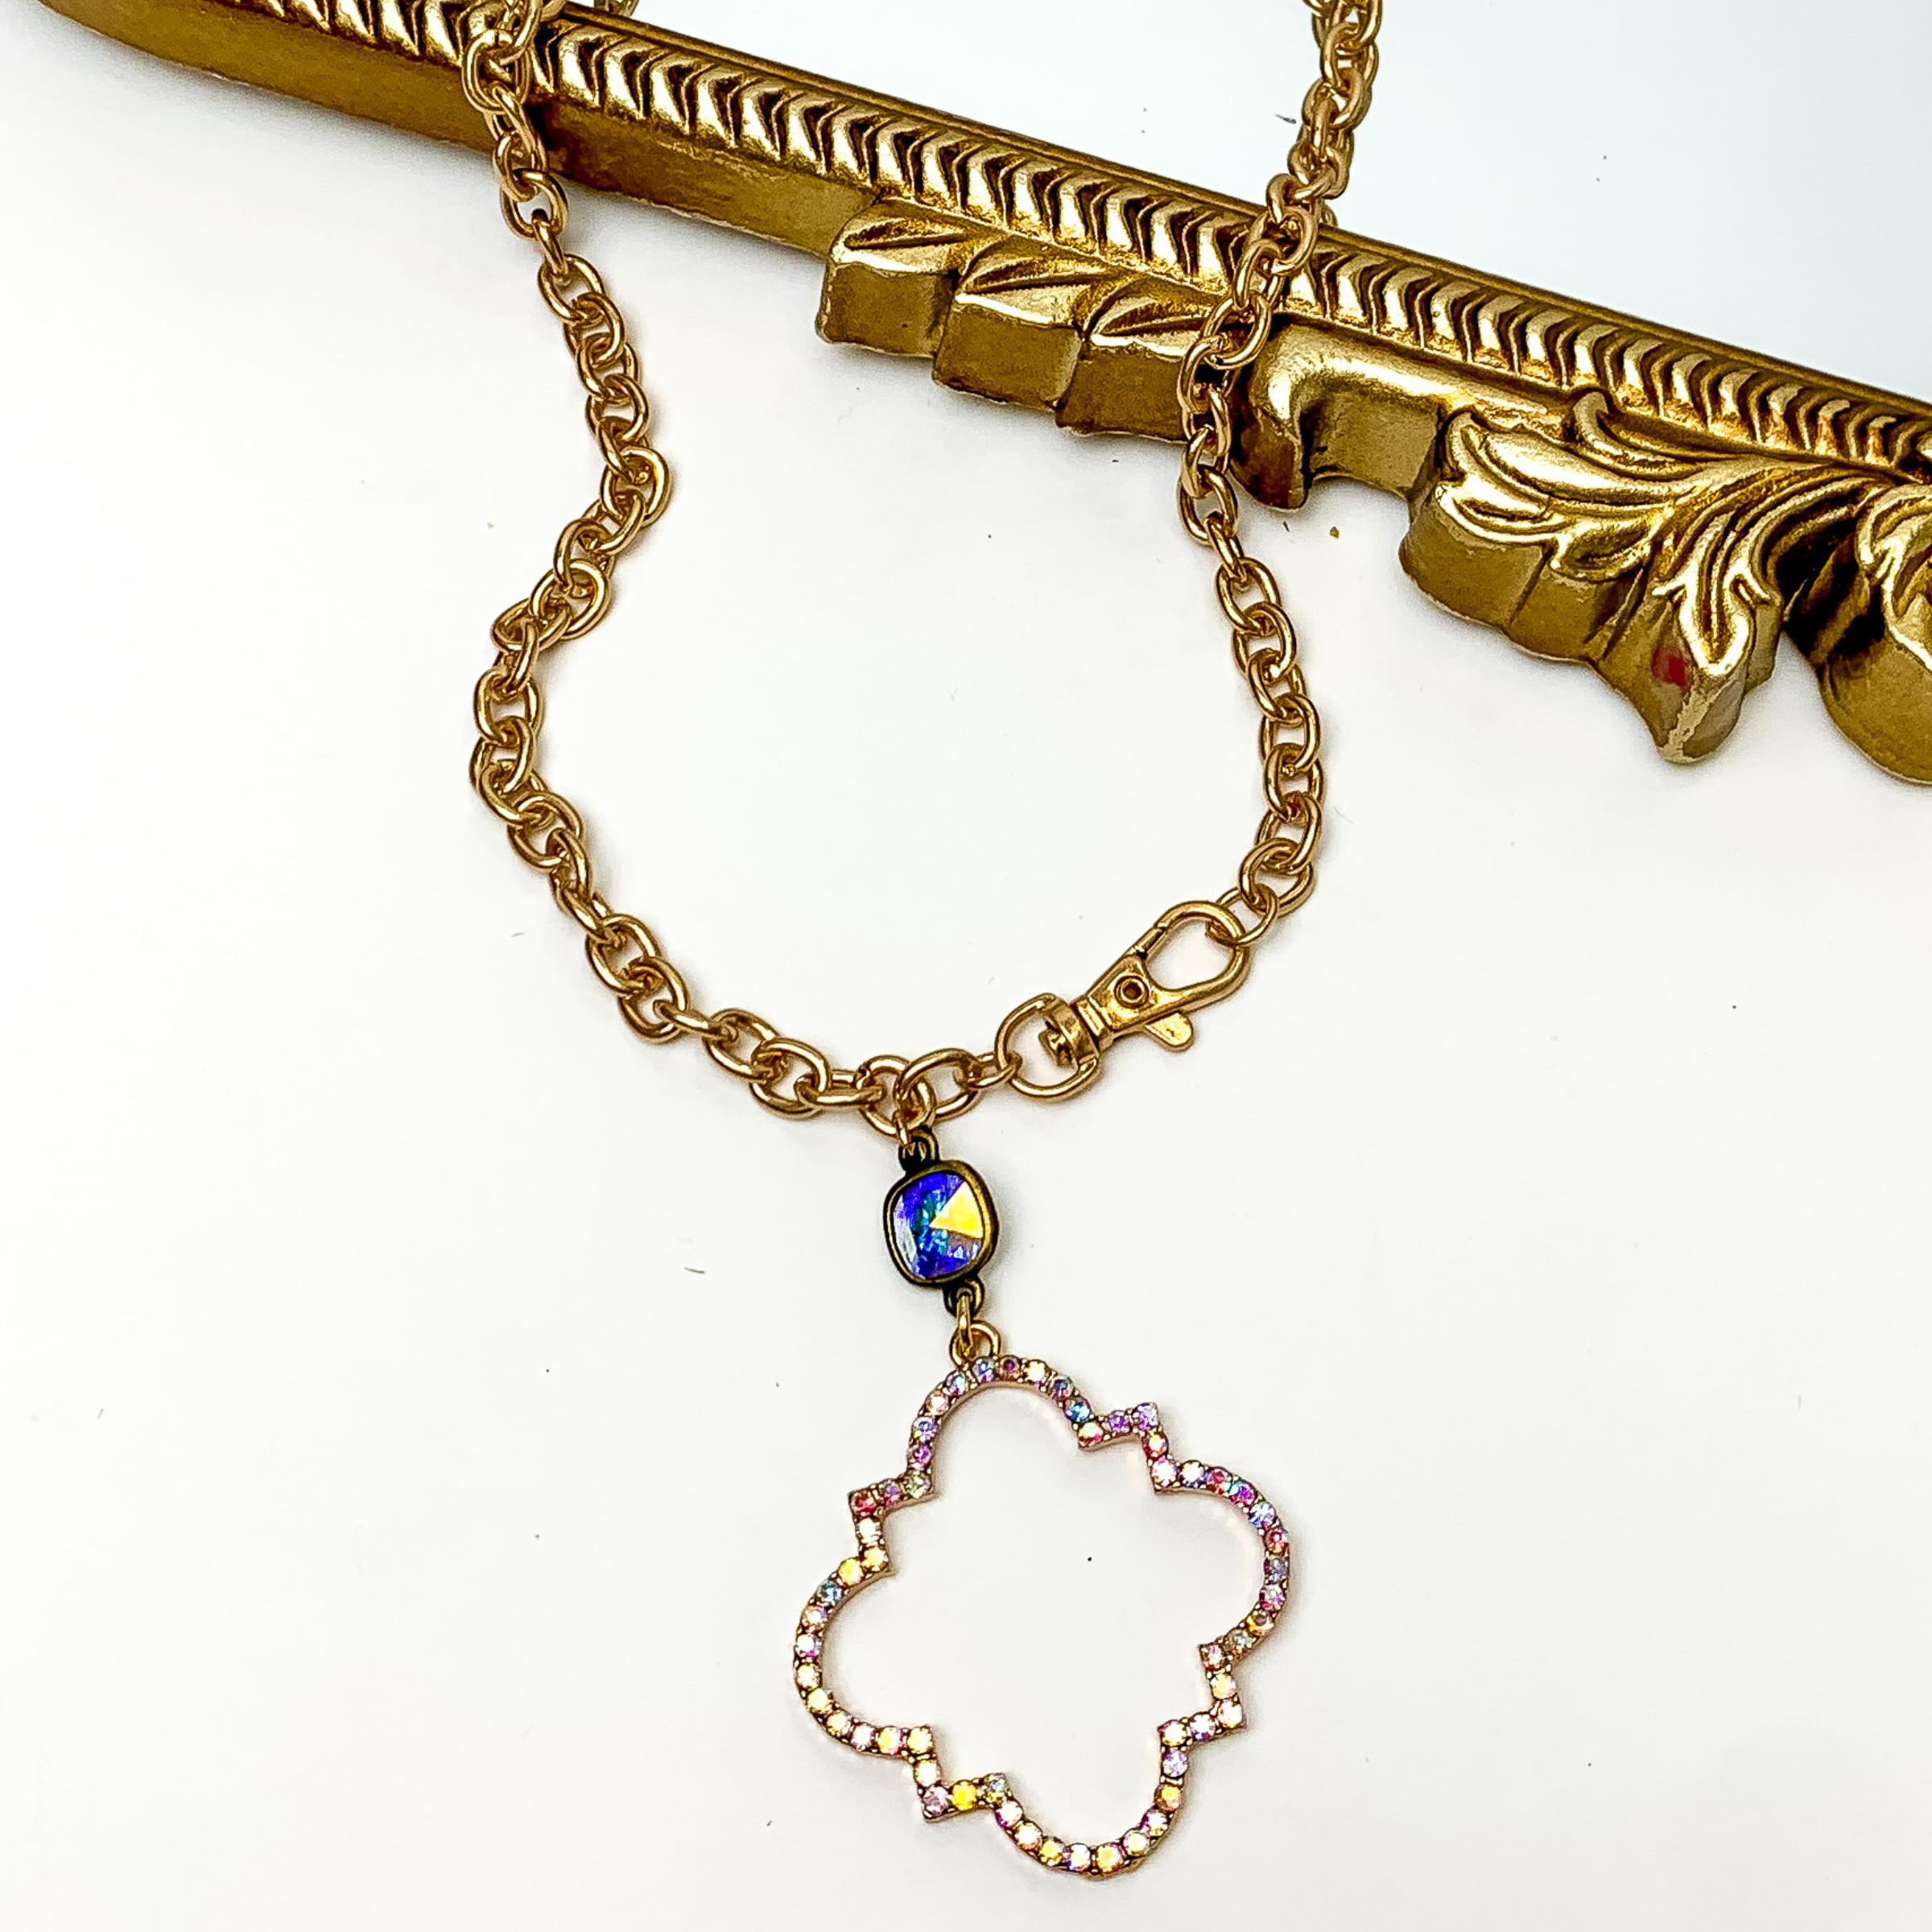 Chain necklace with a ab cushion cut crystal and quatrefoil drop in gold. The quatrefoil has a ab crystal inlay. This necklace is pictured patially laying on a gold mirror and on a white background. 